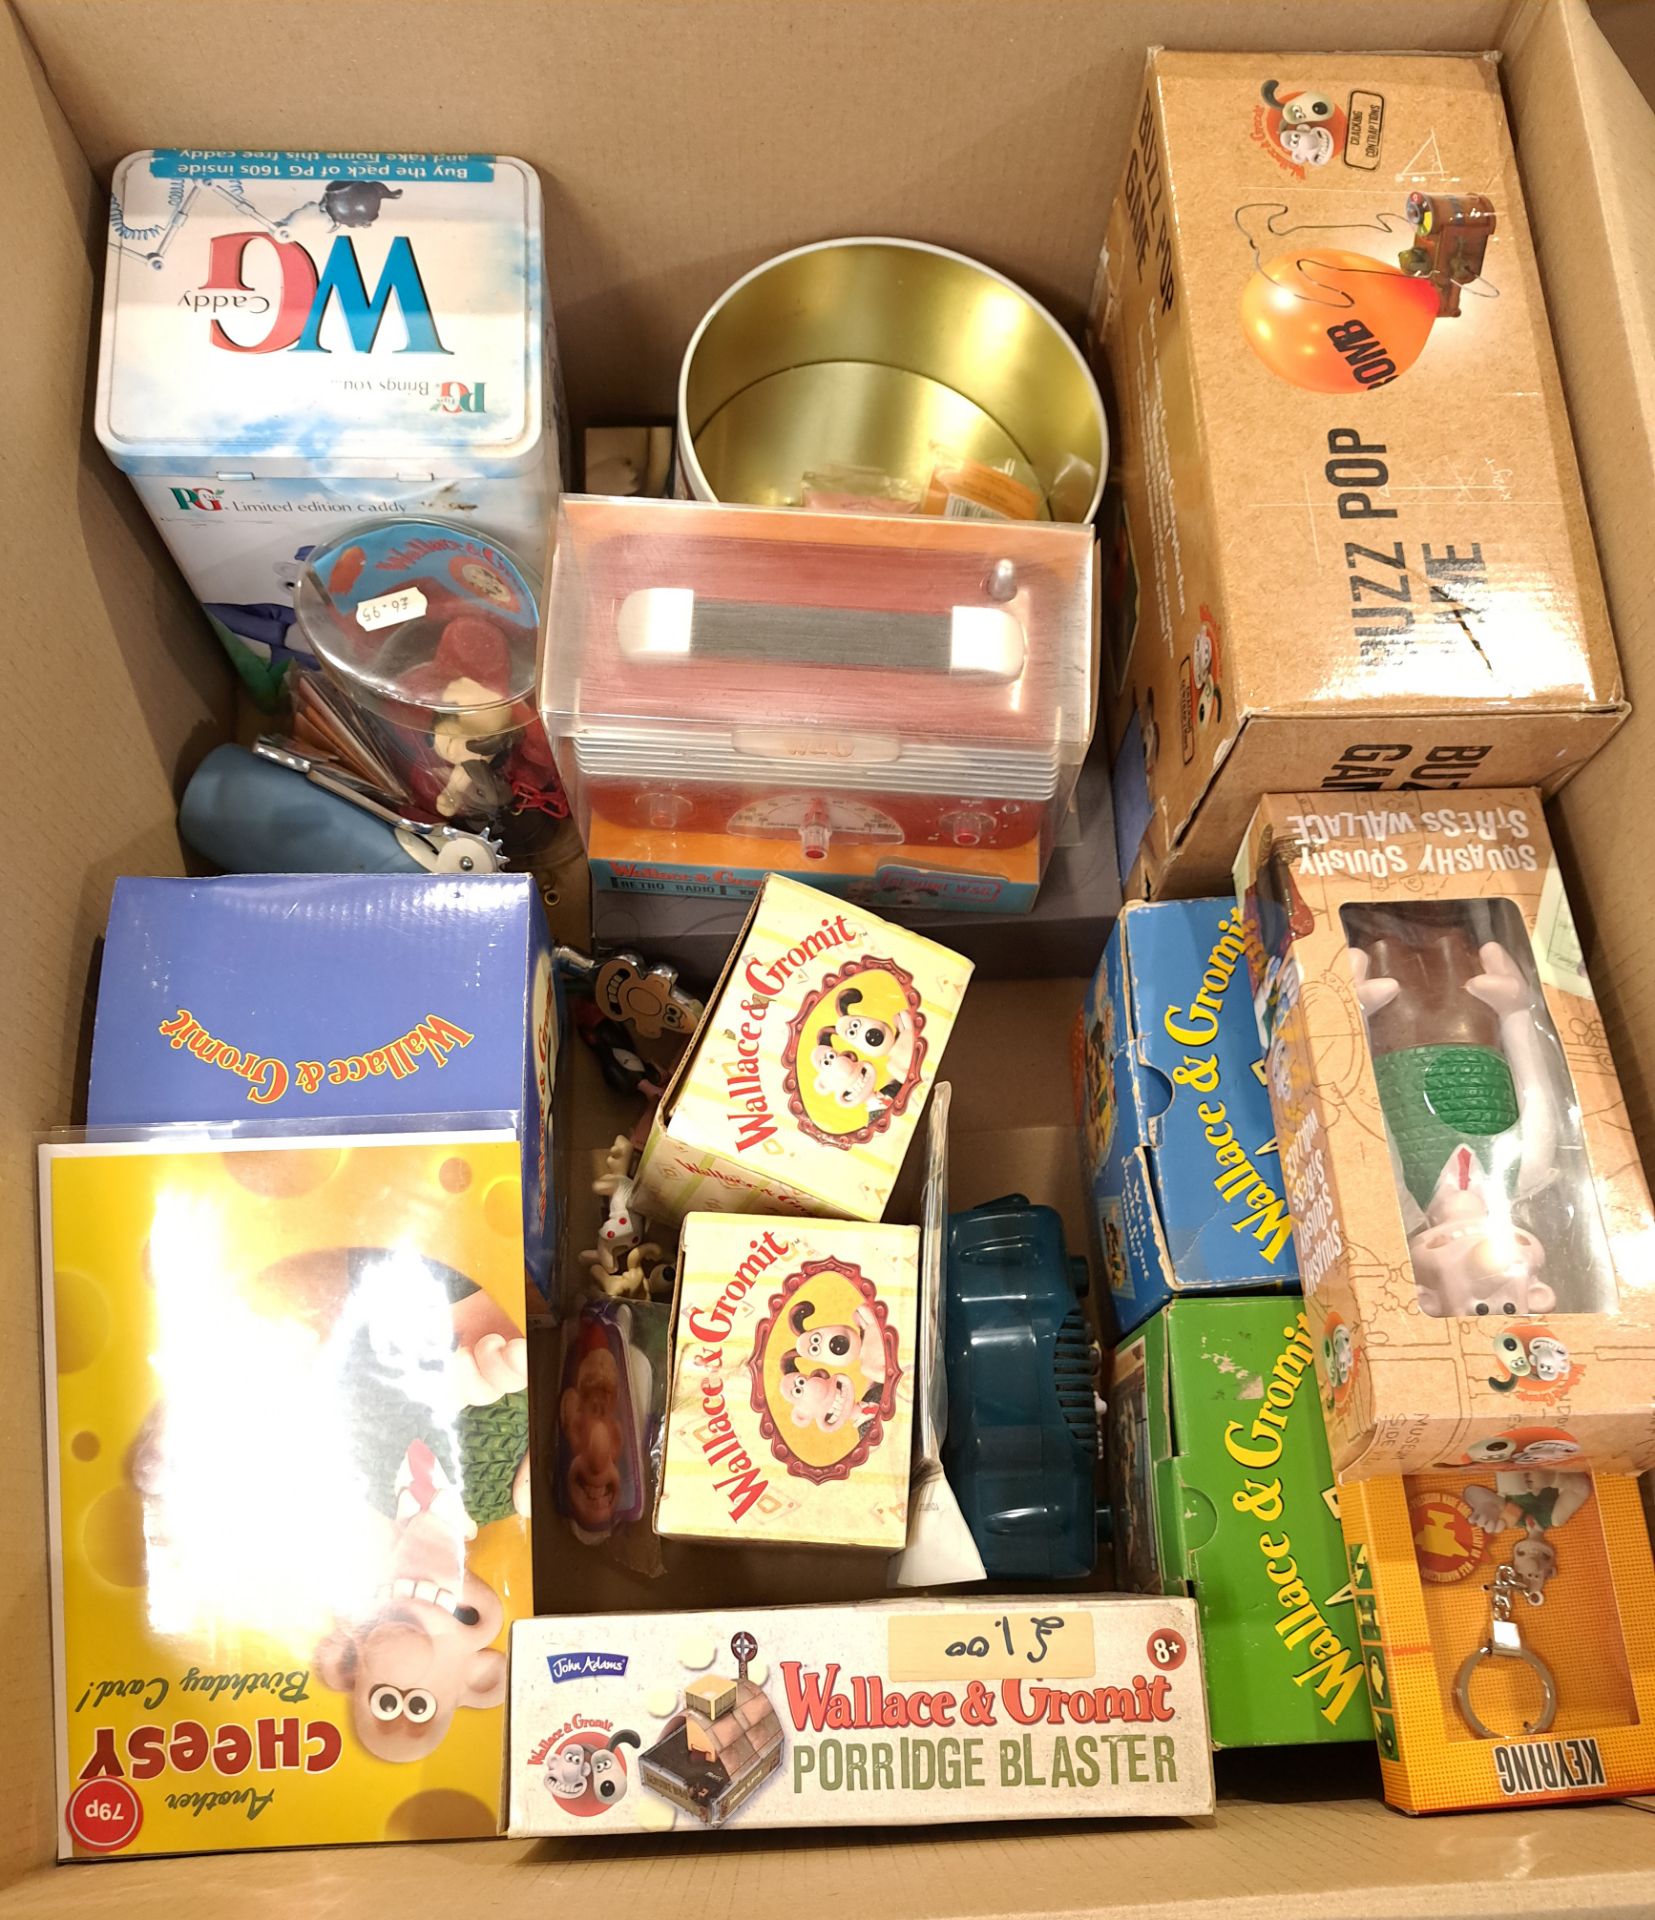 Quantity of Wallace & Gromit Collectibles